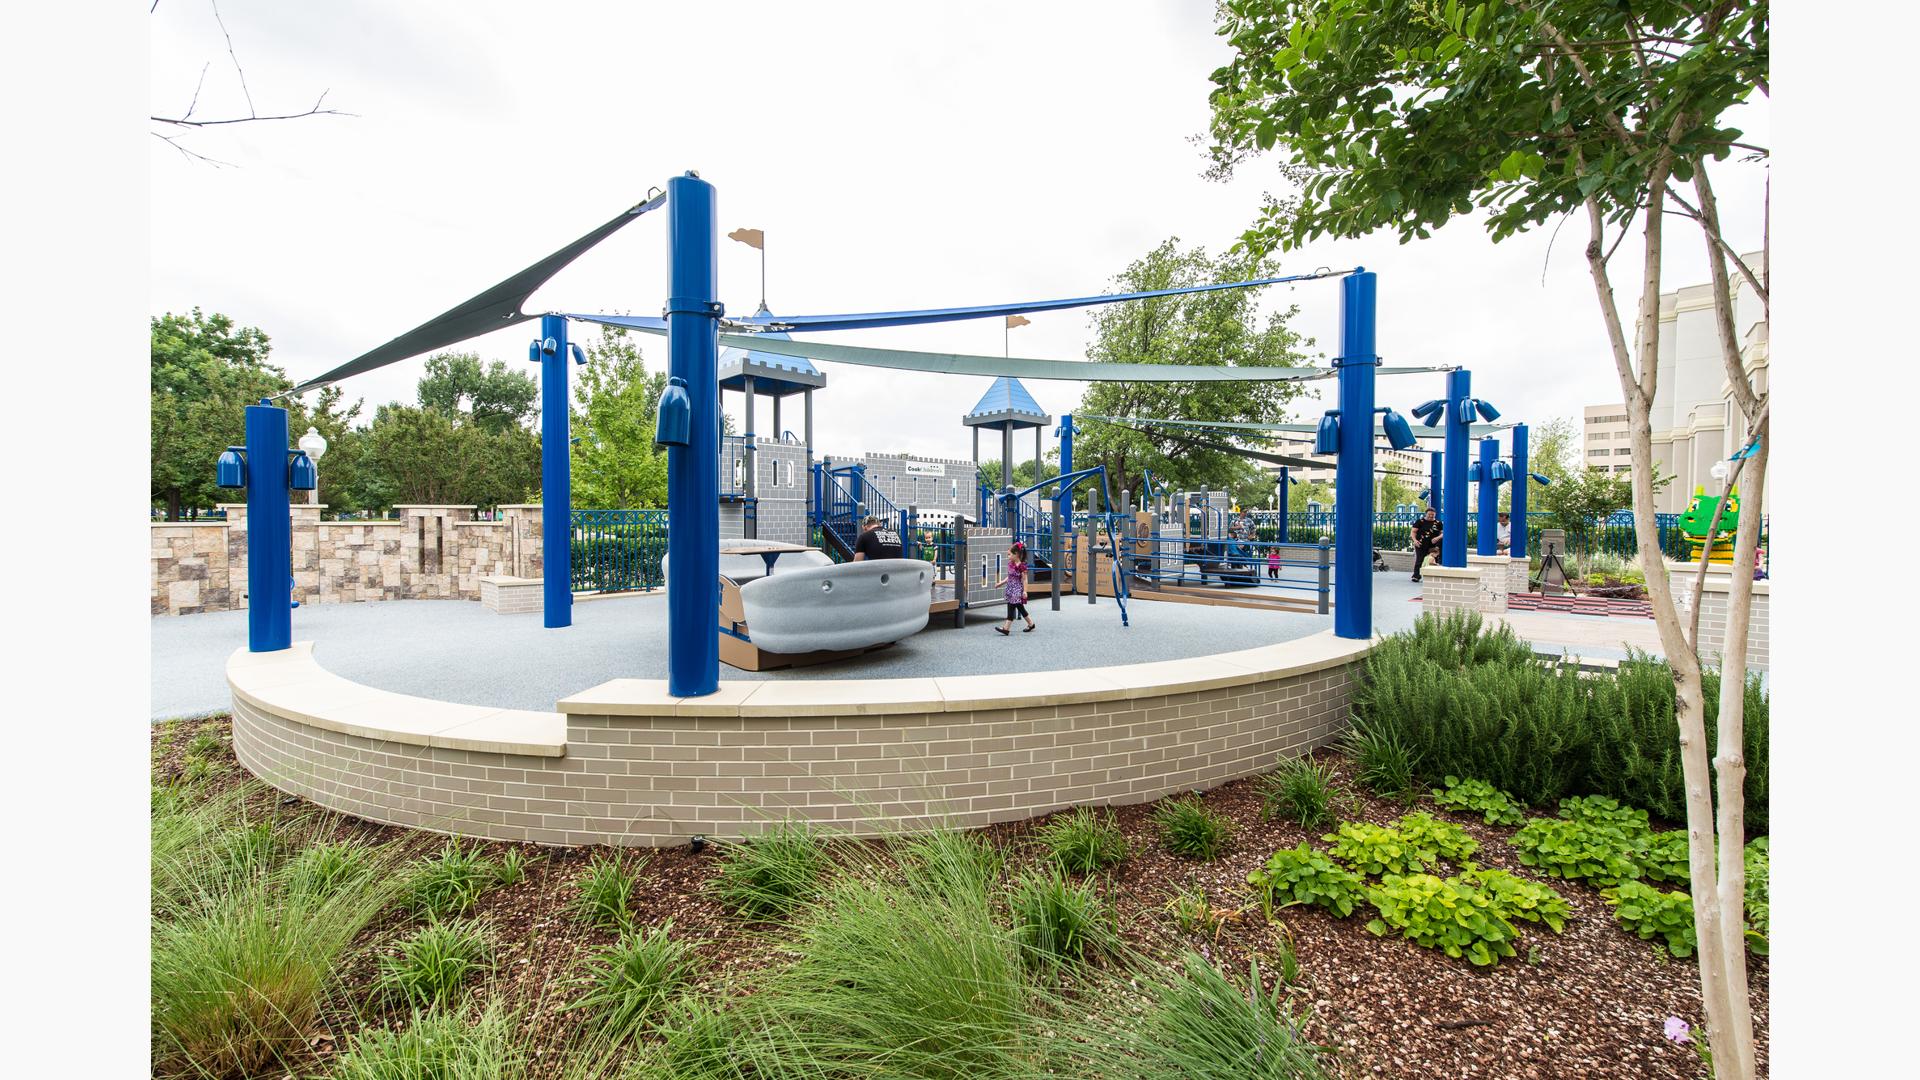 Cook Children’s Hospital, Fort Worth, Texas, for ages 5 to 12.  Custom medieval-theme PlayBooster® playstructure with access to ramps. Features inclusive play activities like sensory-stimulating play panels and Rollerslide, Sway Fun® Glider, and Talk Tubes.